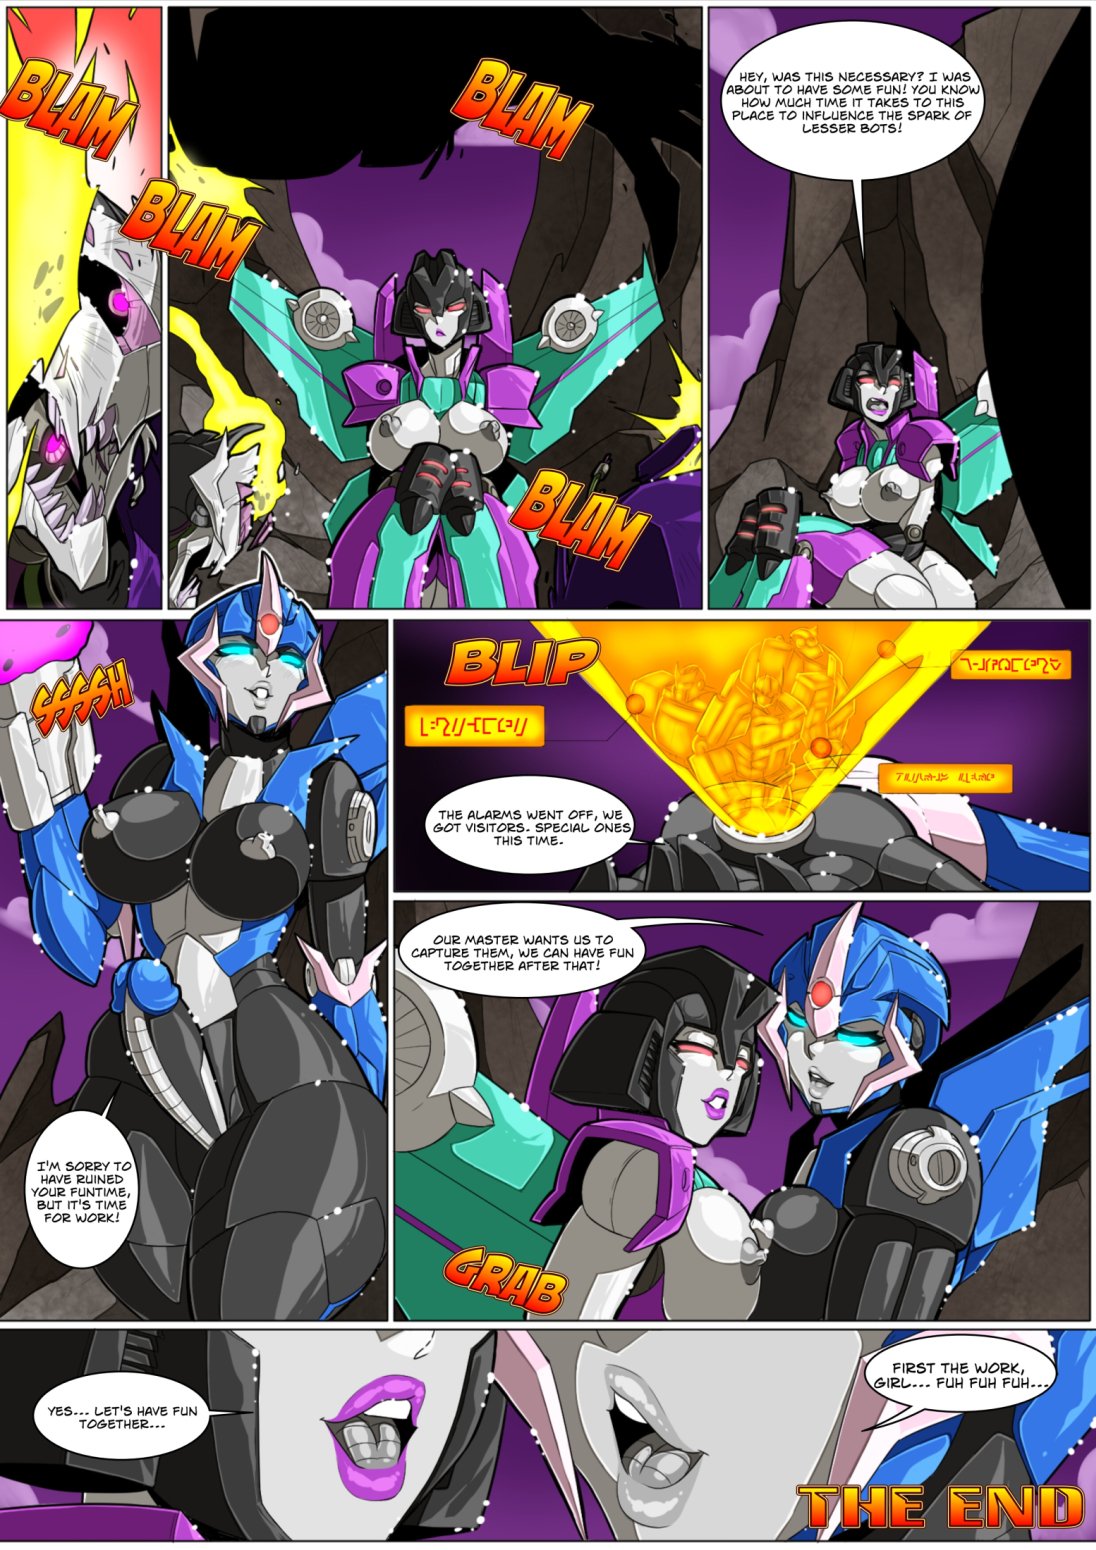 Argee Transformers Comic Porn - The Null Zone -Parallel- (Transformers) comic porn - HD Porn Comics